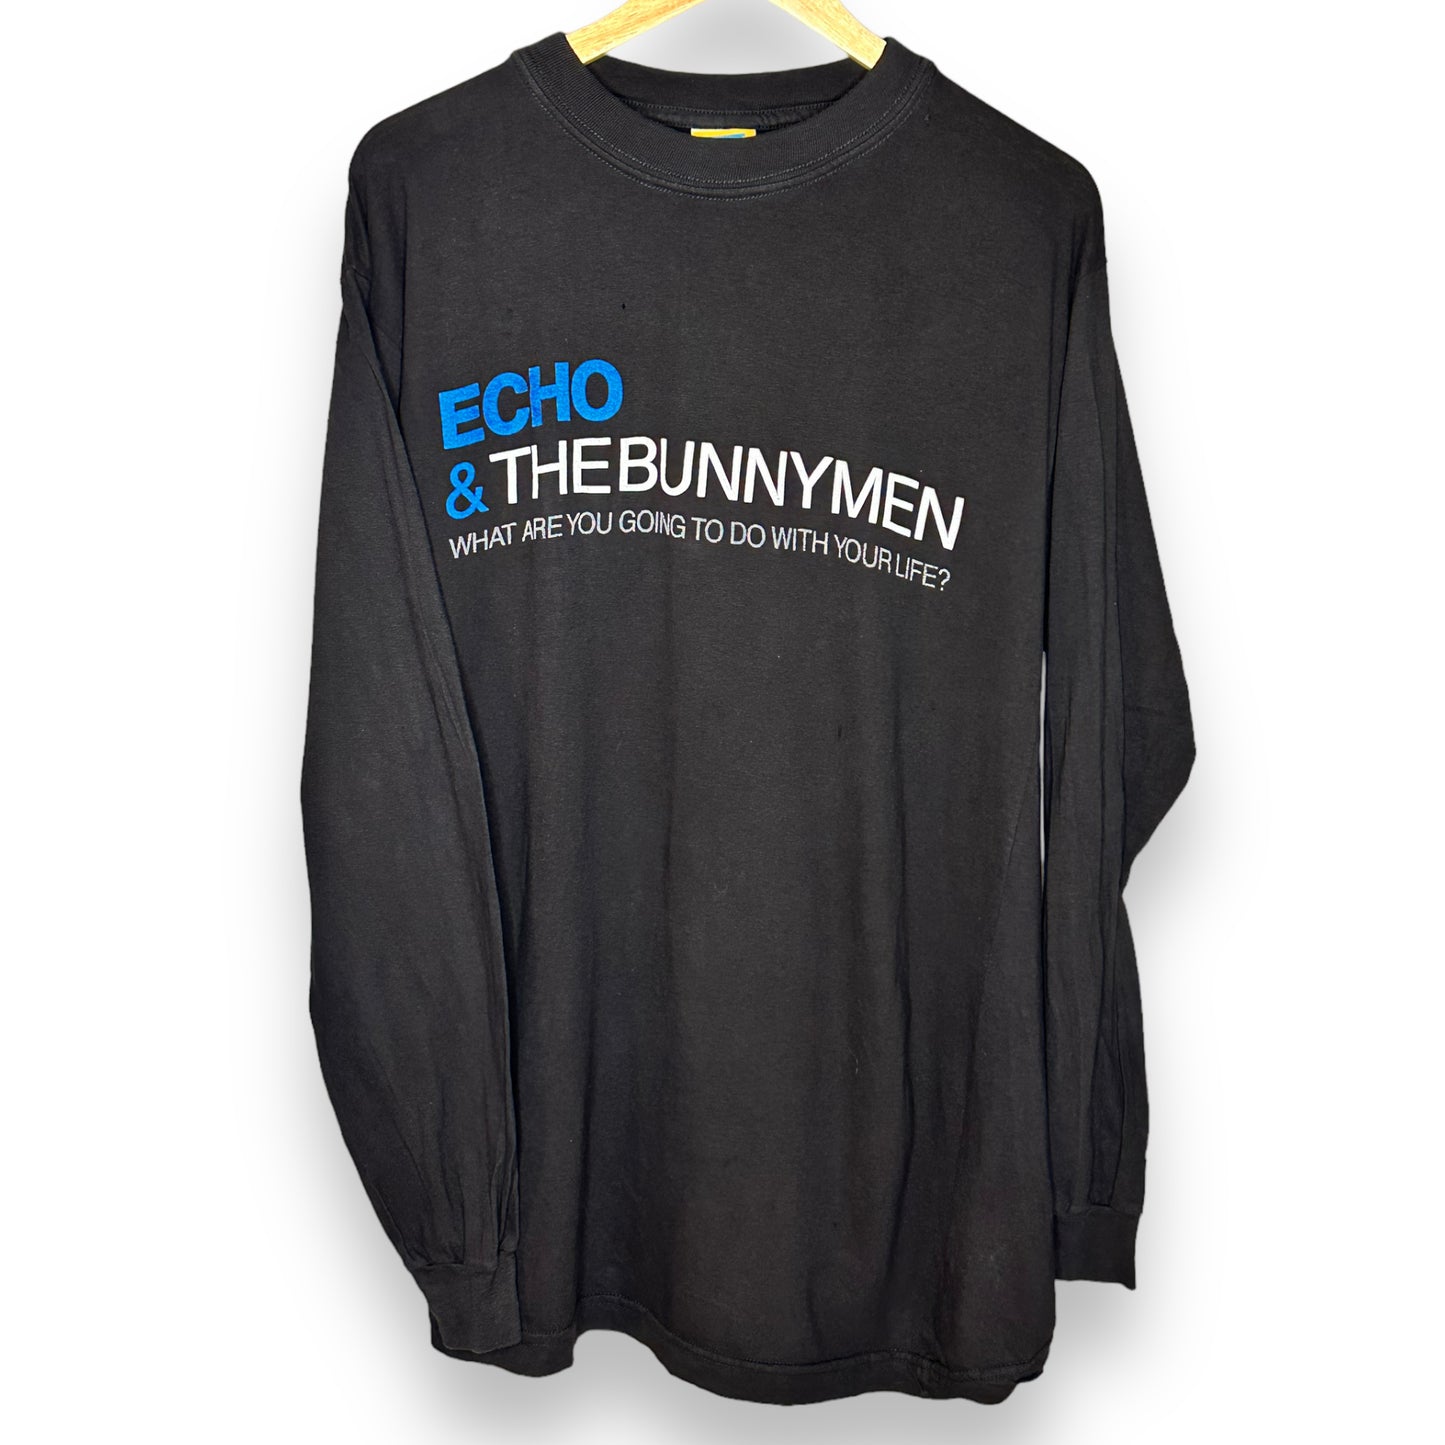 Vintage 1999 Echo & The Bunnymen - What Are You Going To Do With Your Life? Longsleeve T-Shirt XL